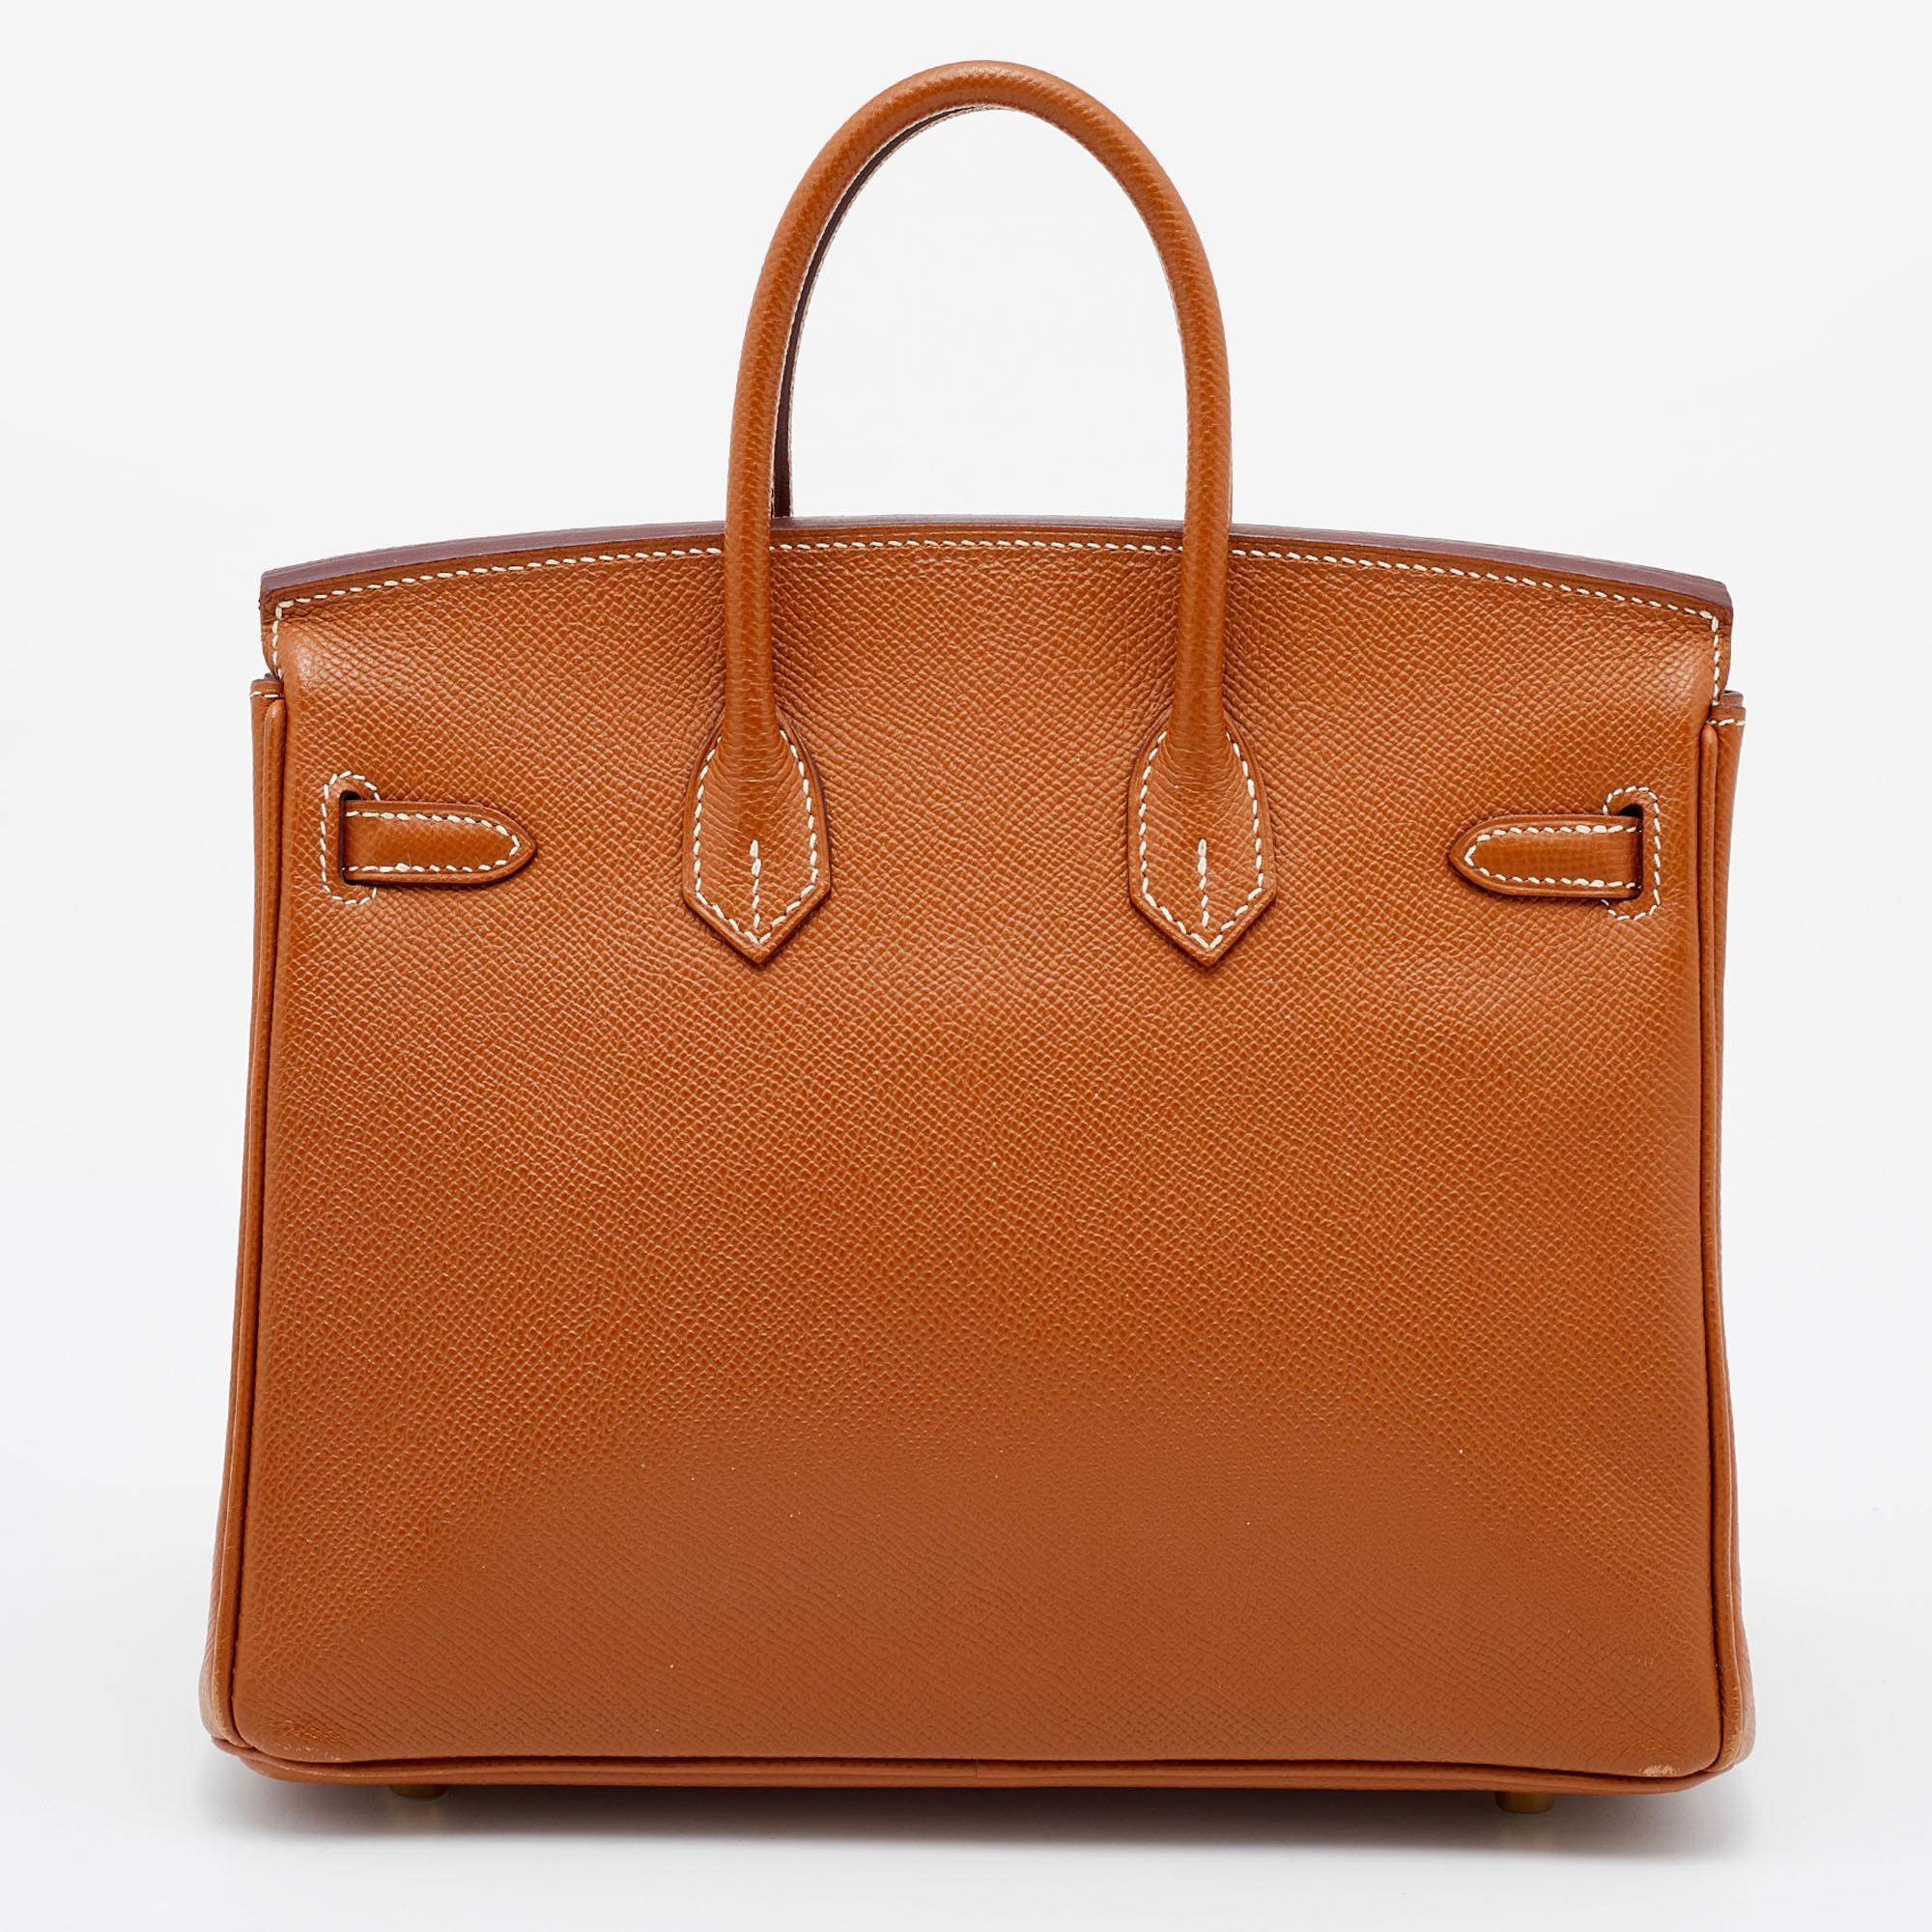 Inspired by Jane Birkin, the Hermes Birkin is one of the most desired handbags in the world. Over the years, it has risen to become a timeless classic that never goes out of style. Handcrafted from the highest quality leather by skilled artisans, it